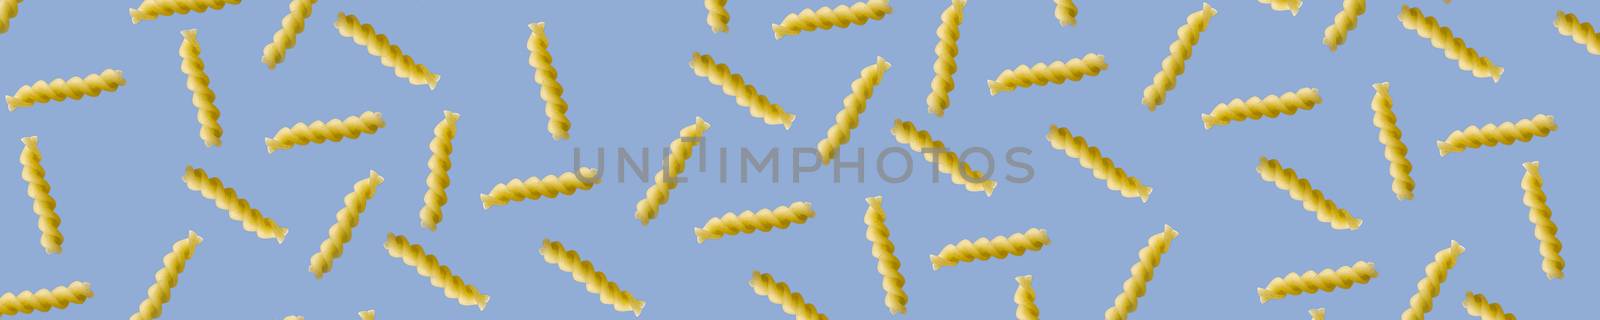 Fusilli pasta random flat lay on blue background without shadow. can be used as raw pasta background, poster, banner not pattern